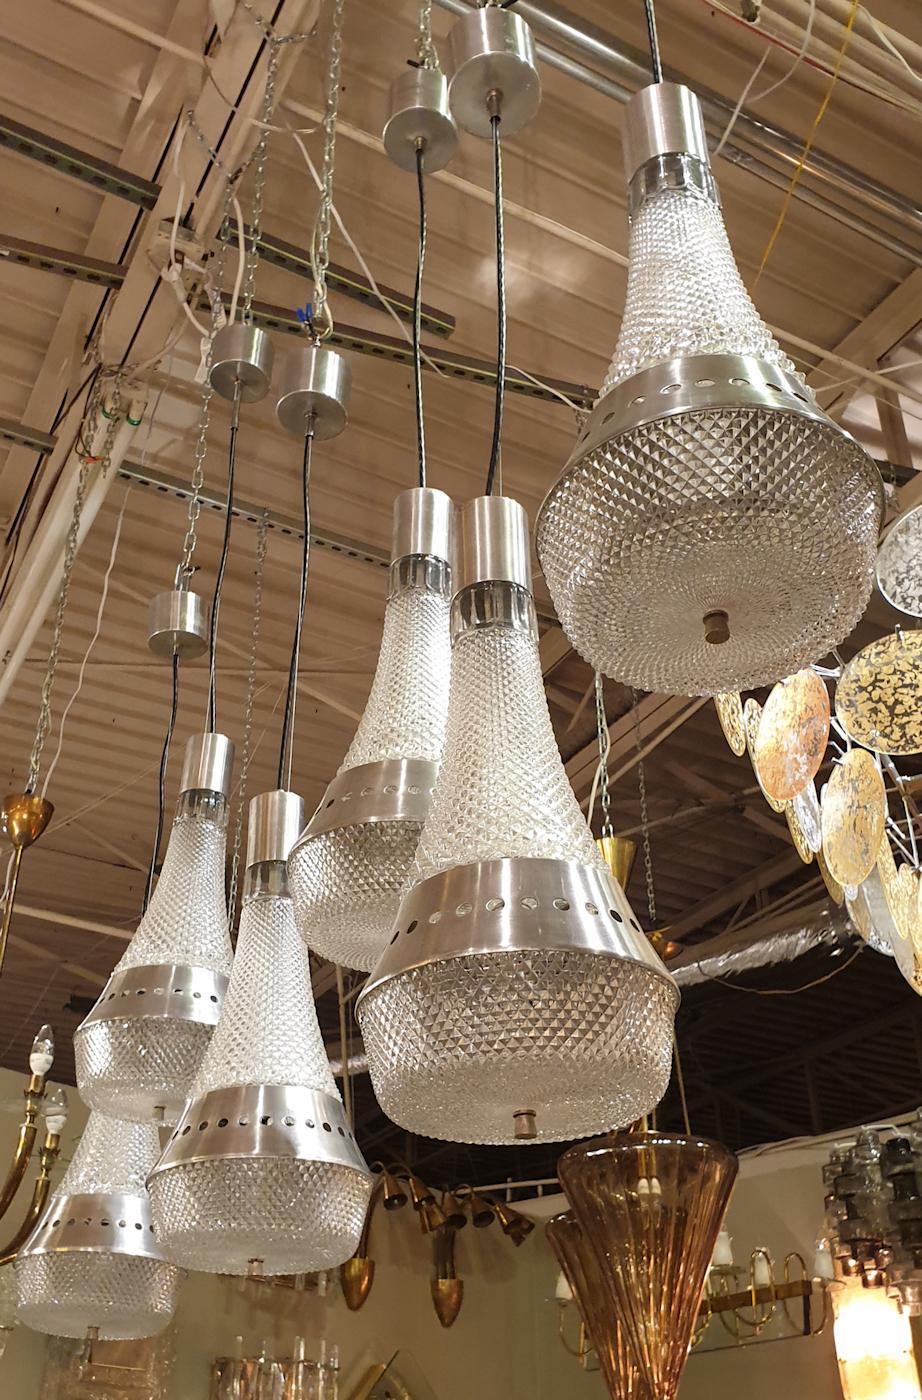 Three pairs of Italian, Mid-Century Modern,  pendant chandeliers, circa 1970s.
The six vintage pendant lights are made of clear diamond pattern glass and brushed steel.
The pendants have 2 lights each, illuminating the two up and down glasses; and